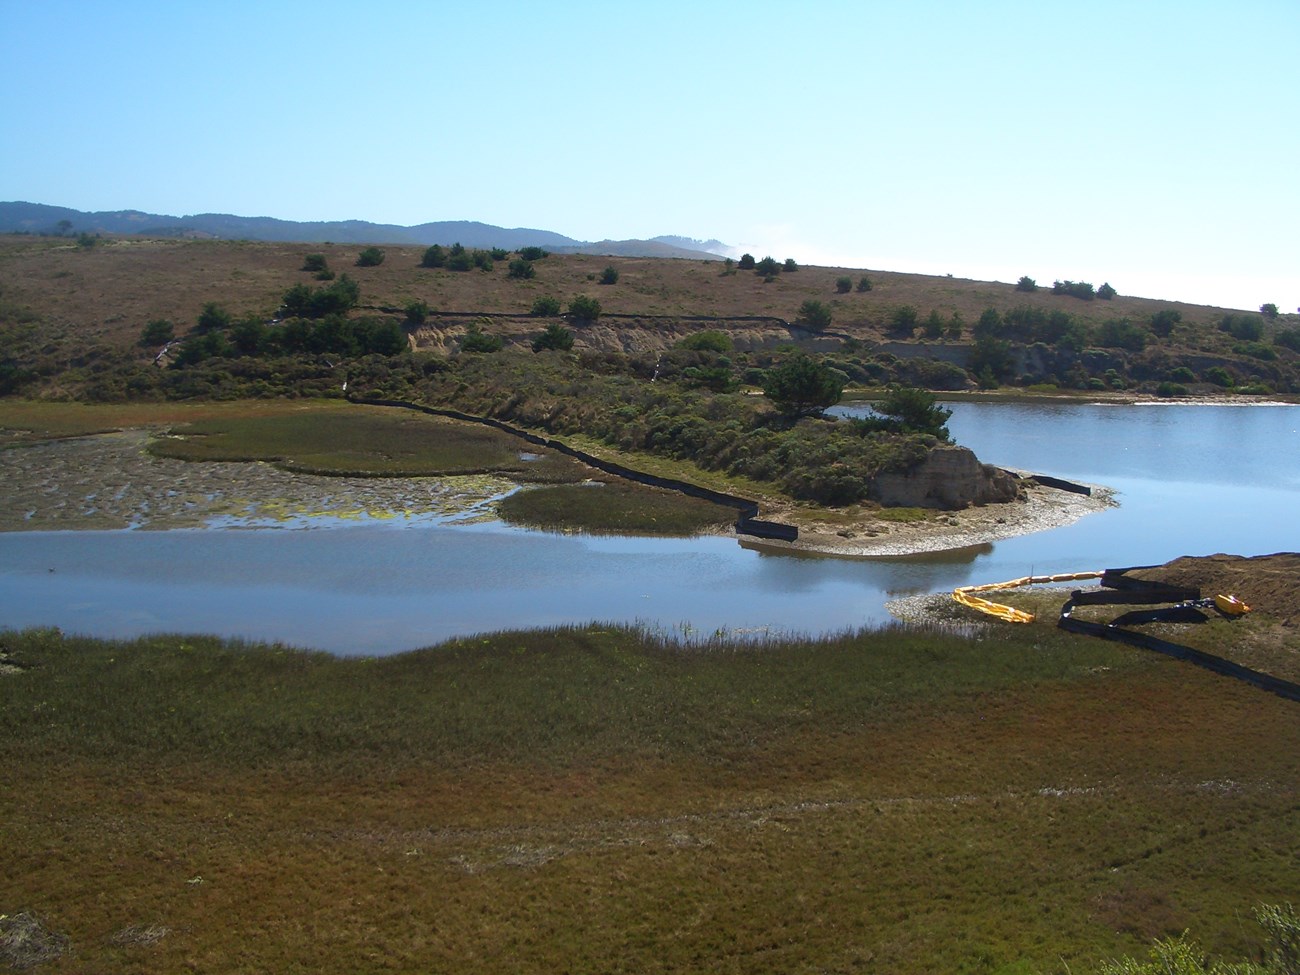 Photo of a very low-profile, shrub-covered dam that has been partially breached at the mouth of a shallow valley.